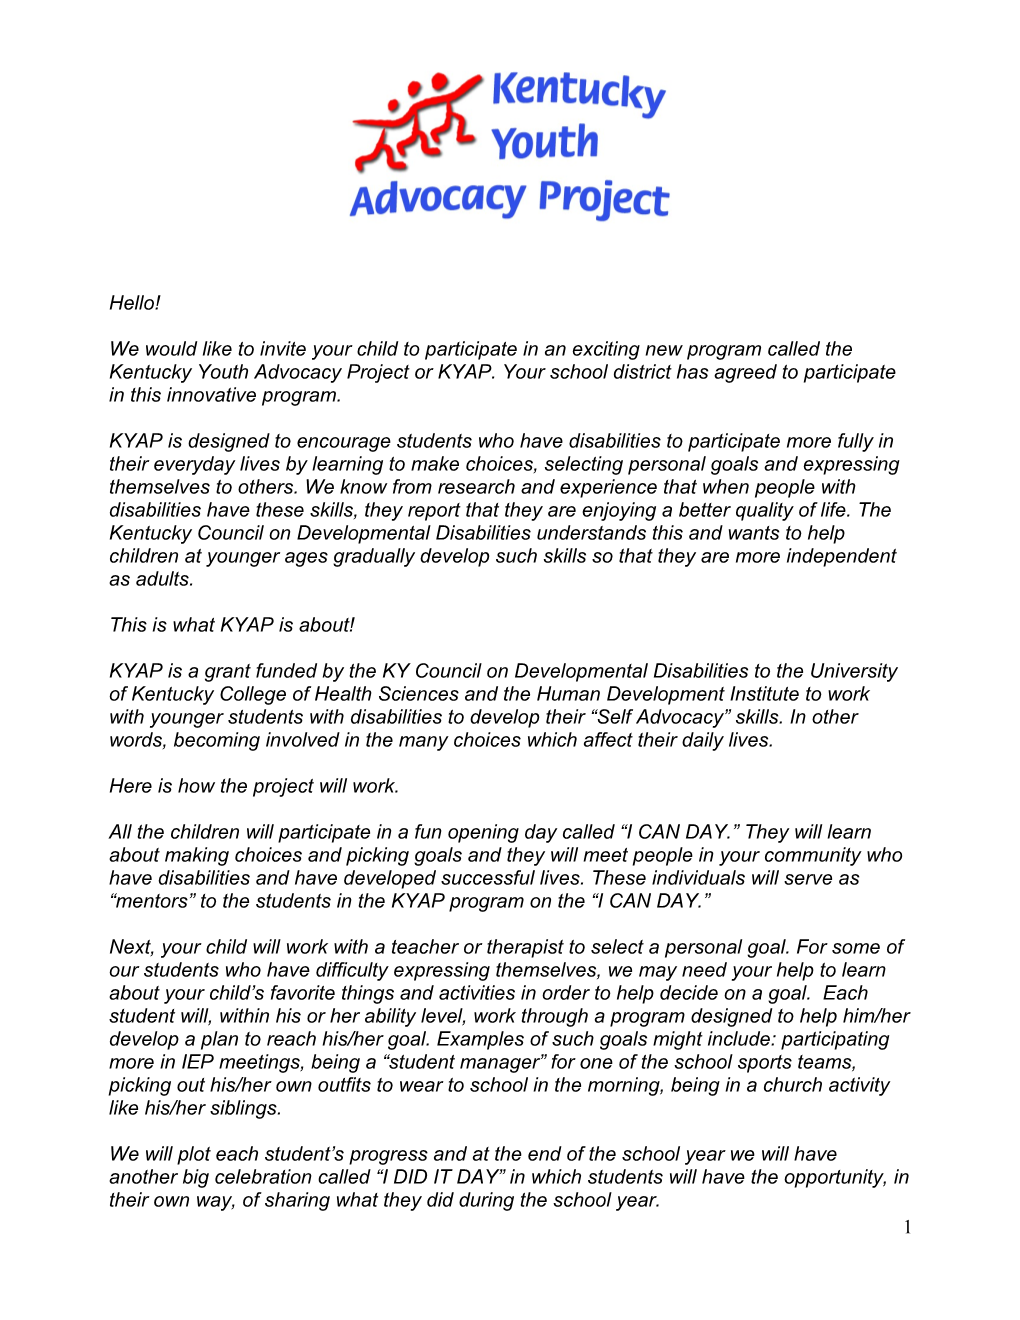 Kentucky Youth Advocacy Project